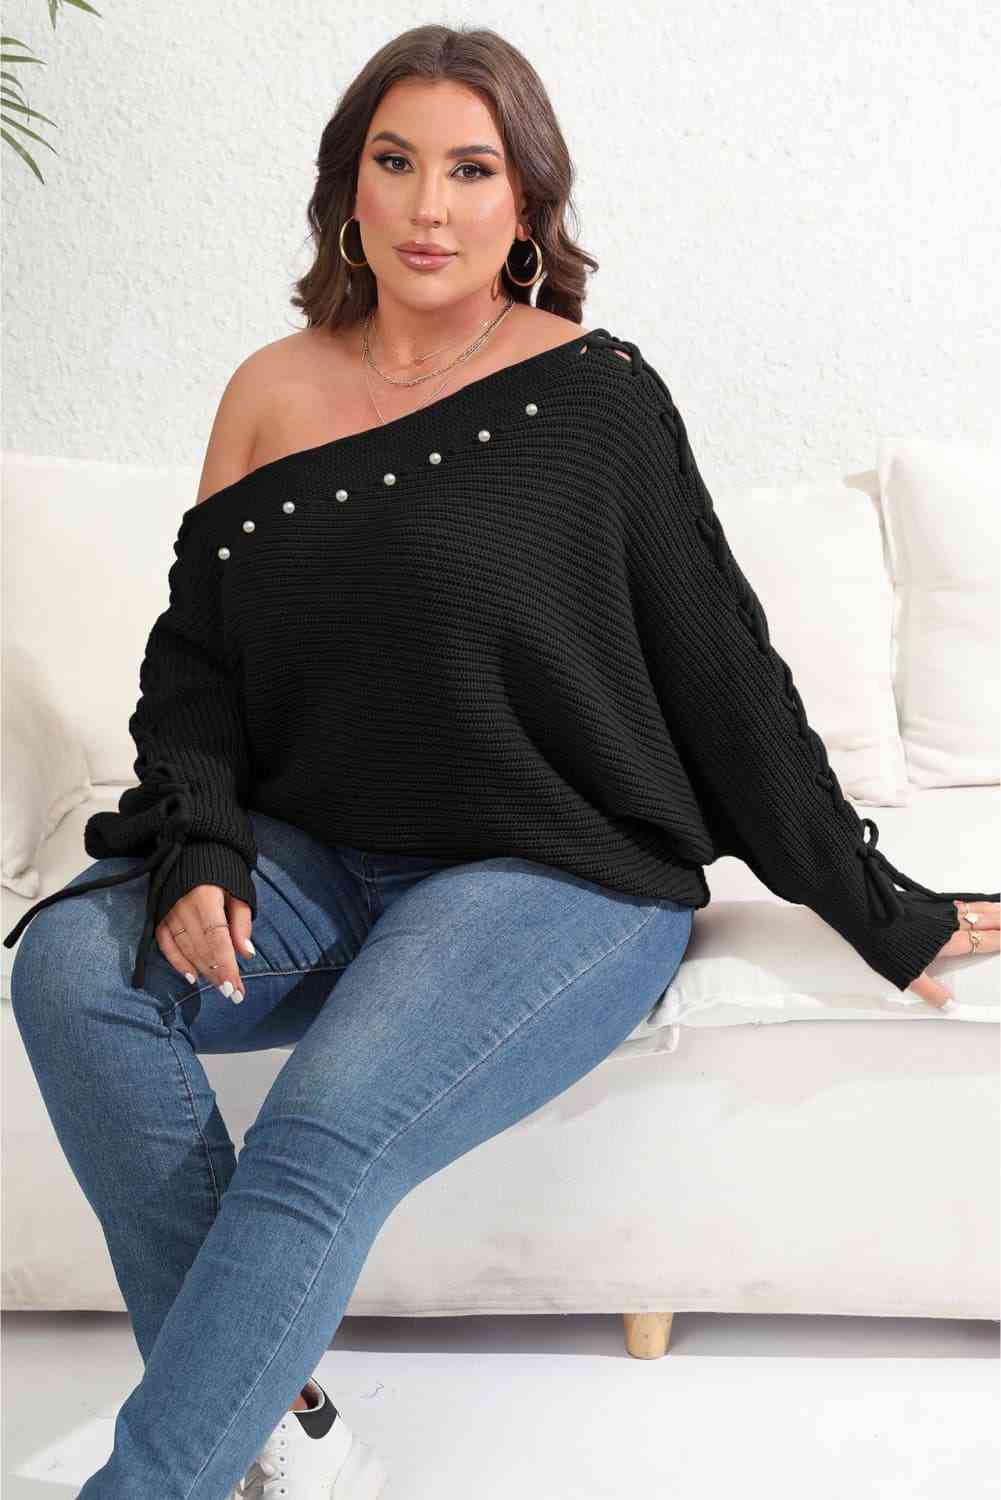 Beaded Pearl Lace Up Sleeve Off Shoulder Asymmetrical Boat Neck Sweater Plus Size Only